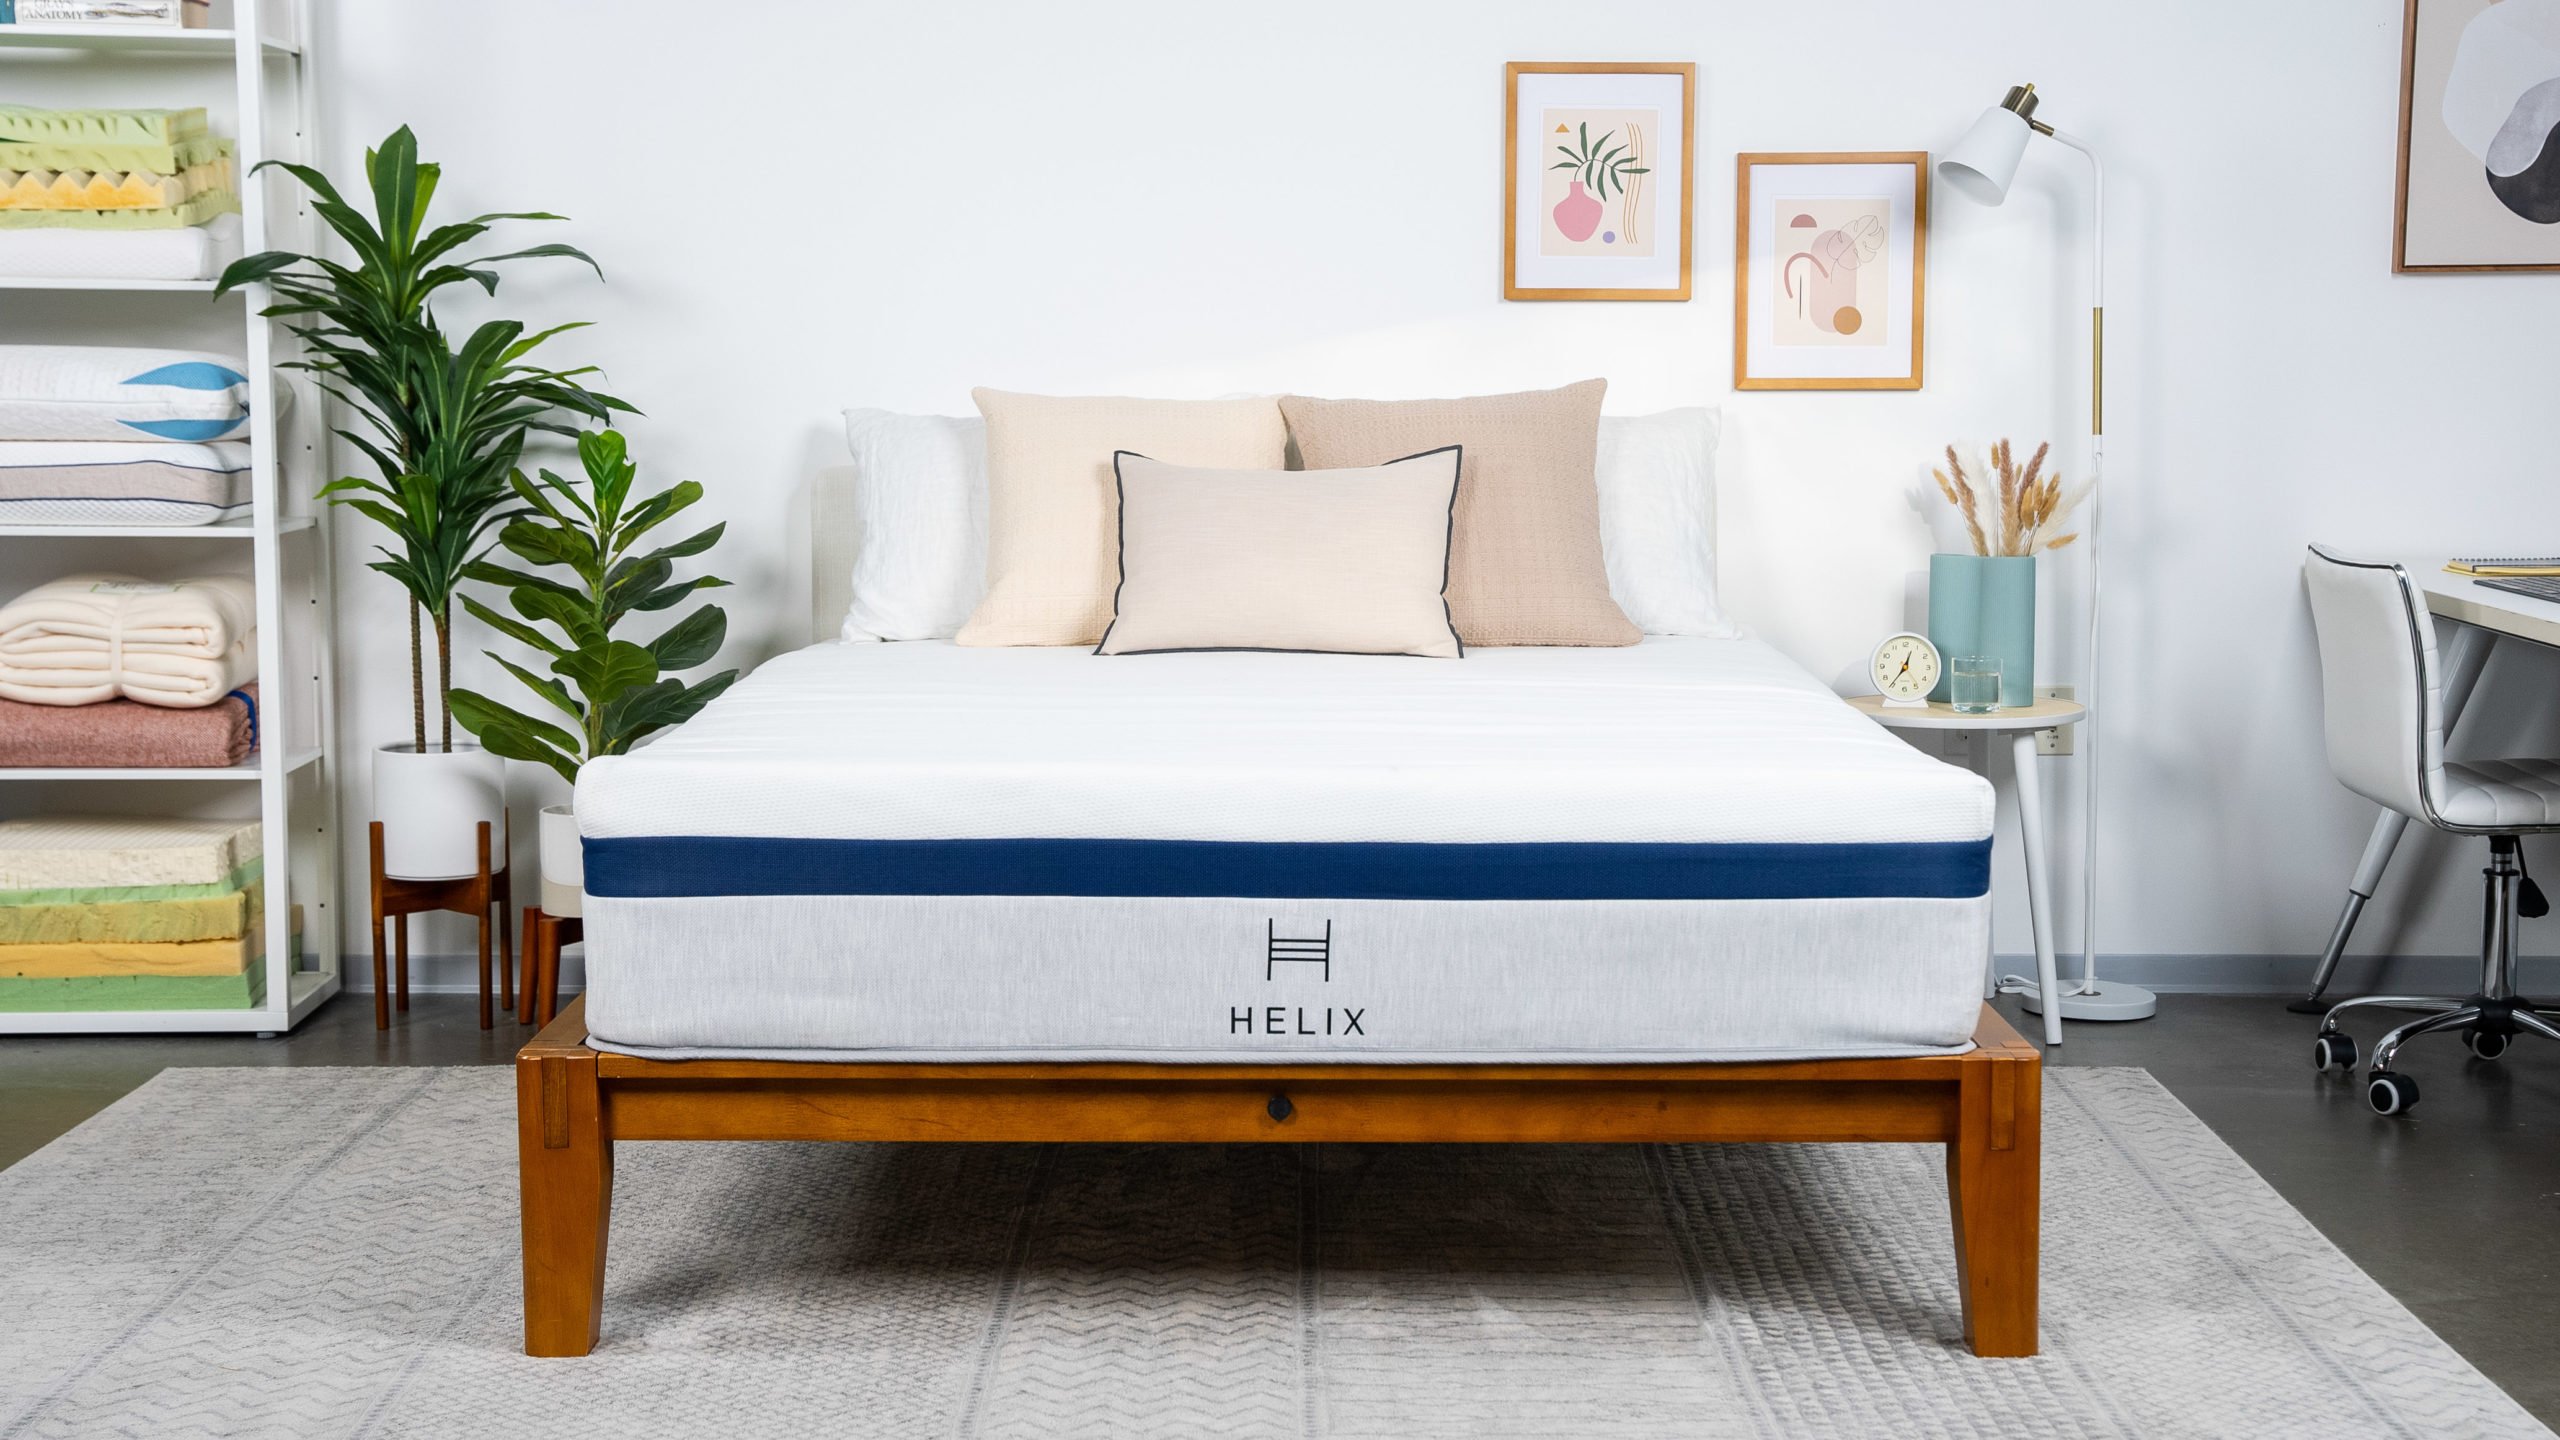  EMMA Hybrid Comfort Mattress - King Size, 13 Inch, Memory Foam,  Pocket Springs, Back Pain Relief and Full-Body Support, 365 Night Trial,  Free Returns, CertiPUR-US Certified, 10 Year Guarantee : Home